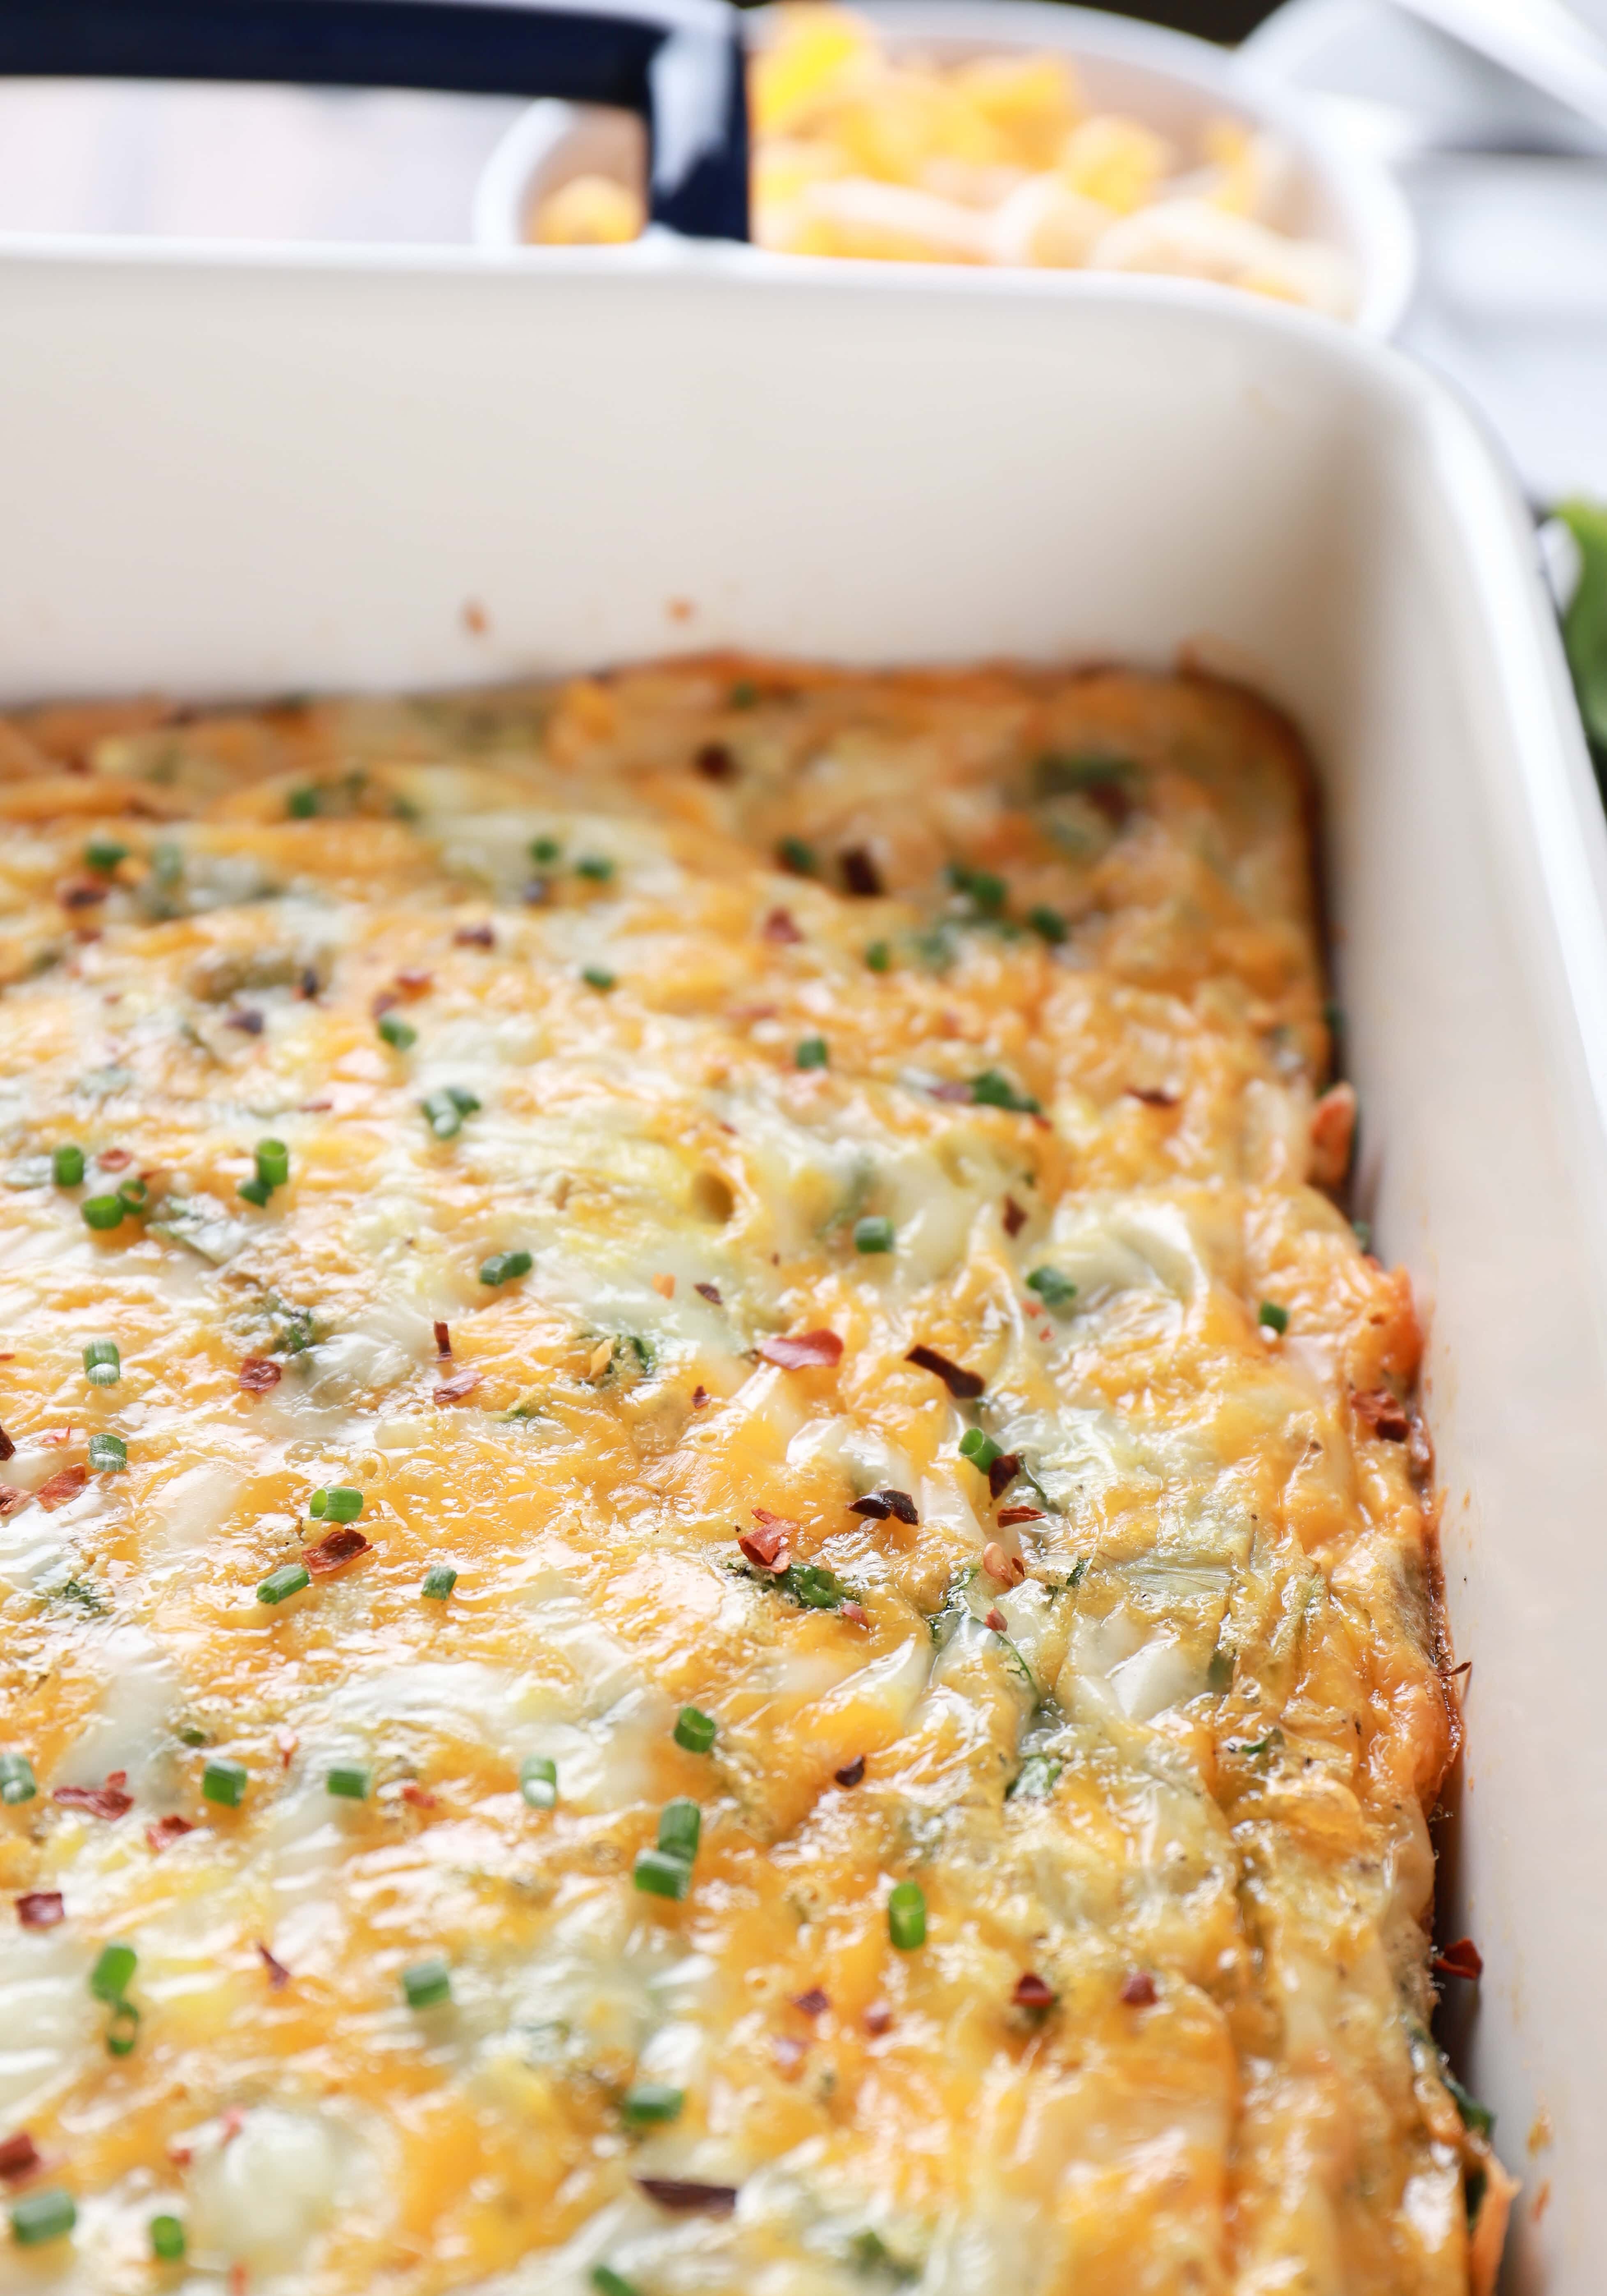 Pan of cheesy spinach and artichoke egg bake. Recipe from A Kitchen Addiction